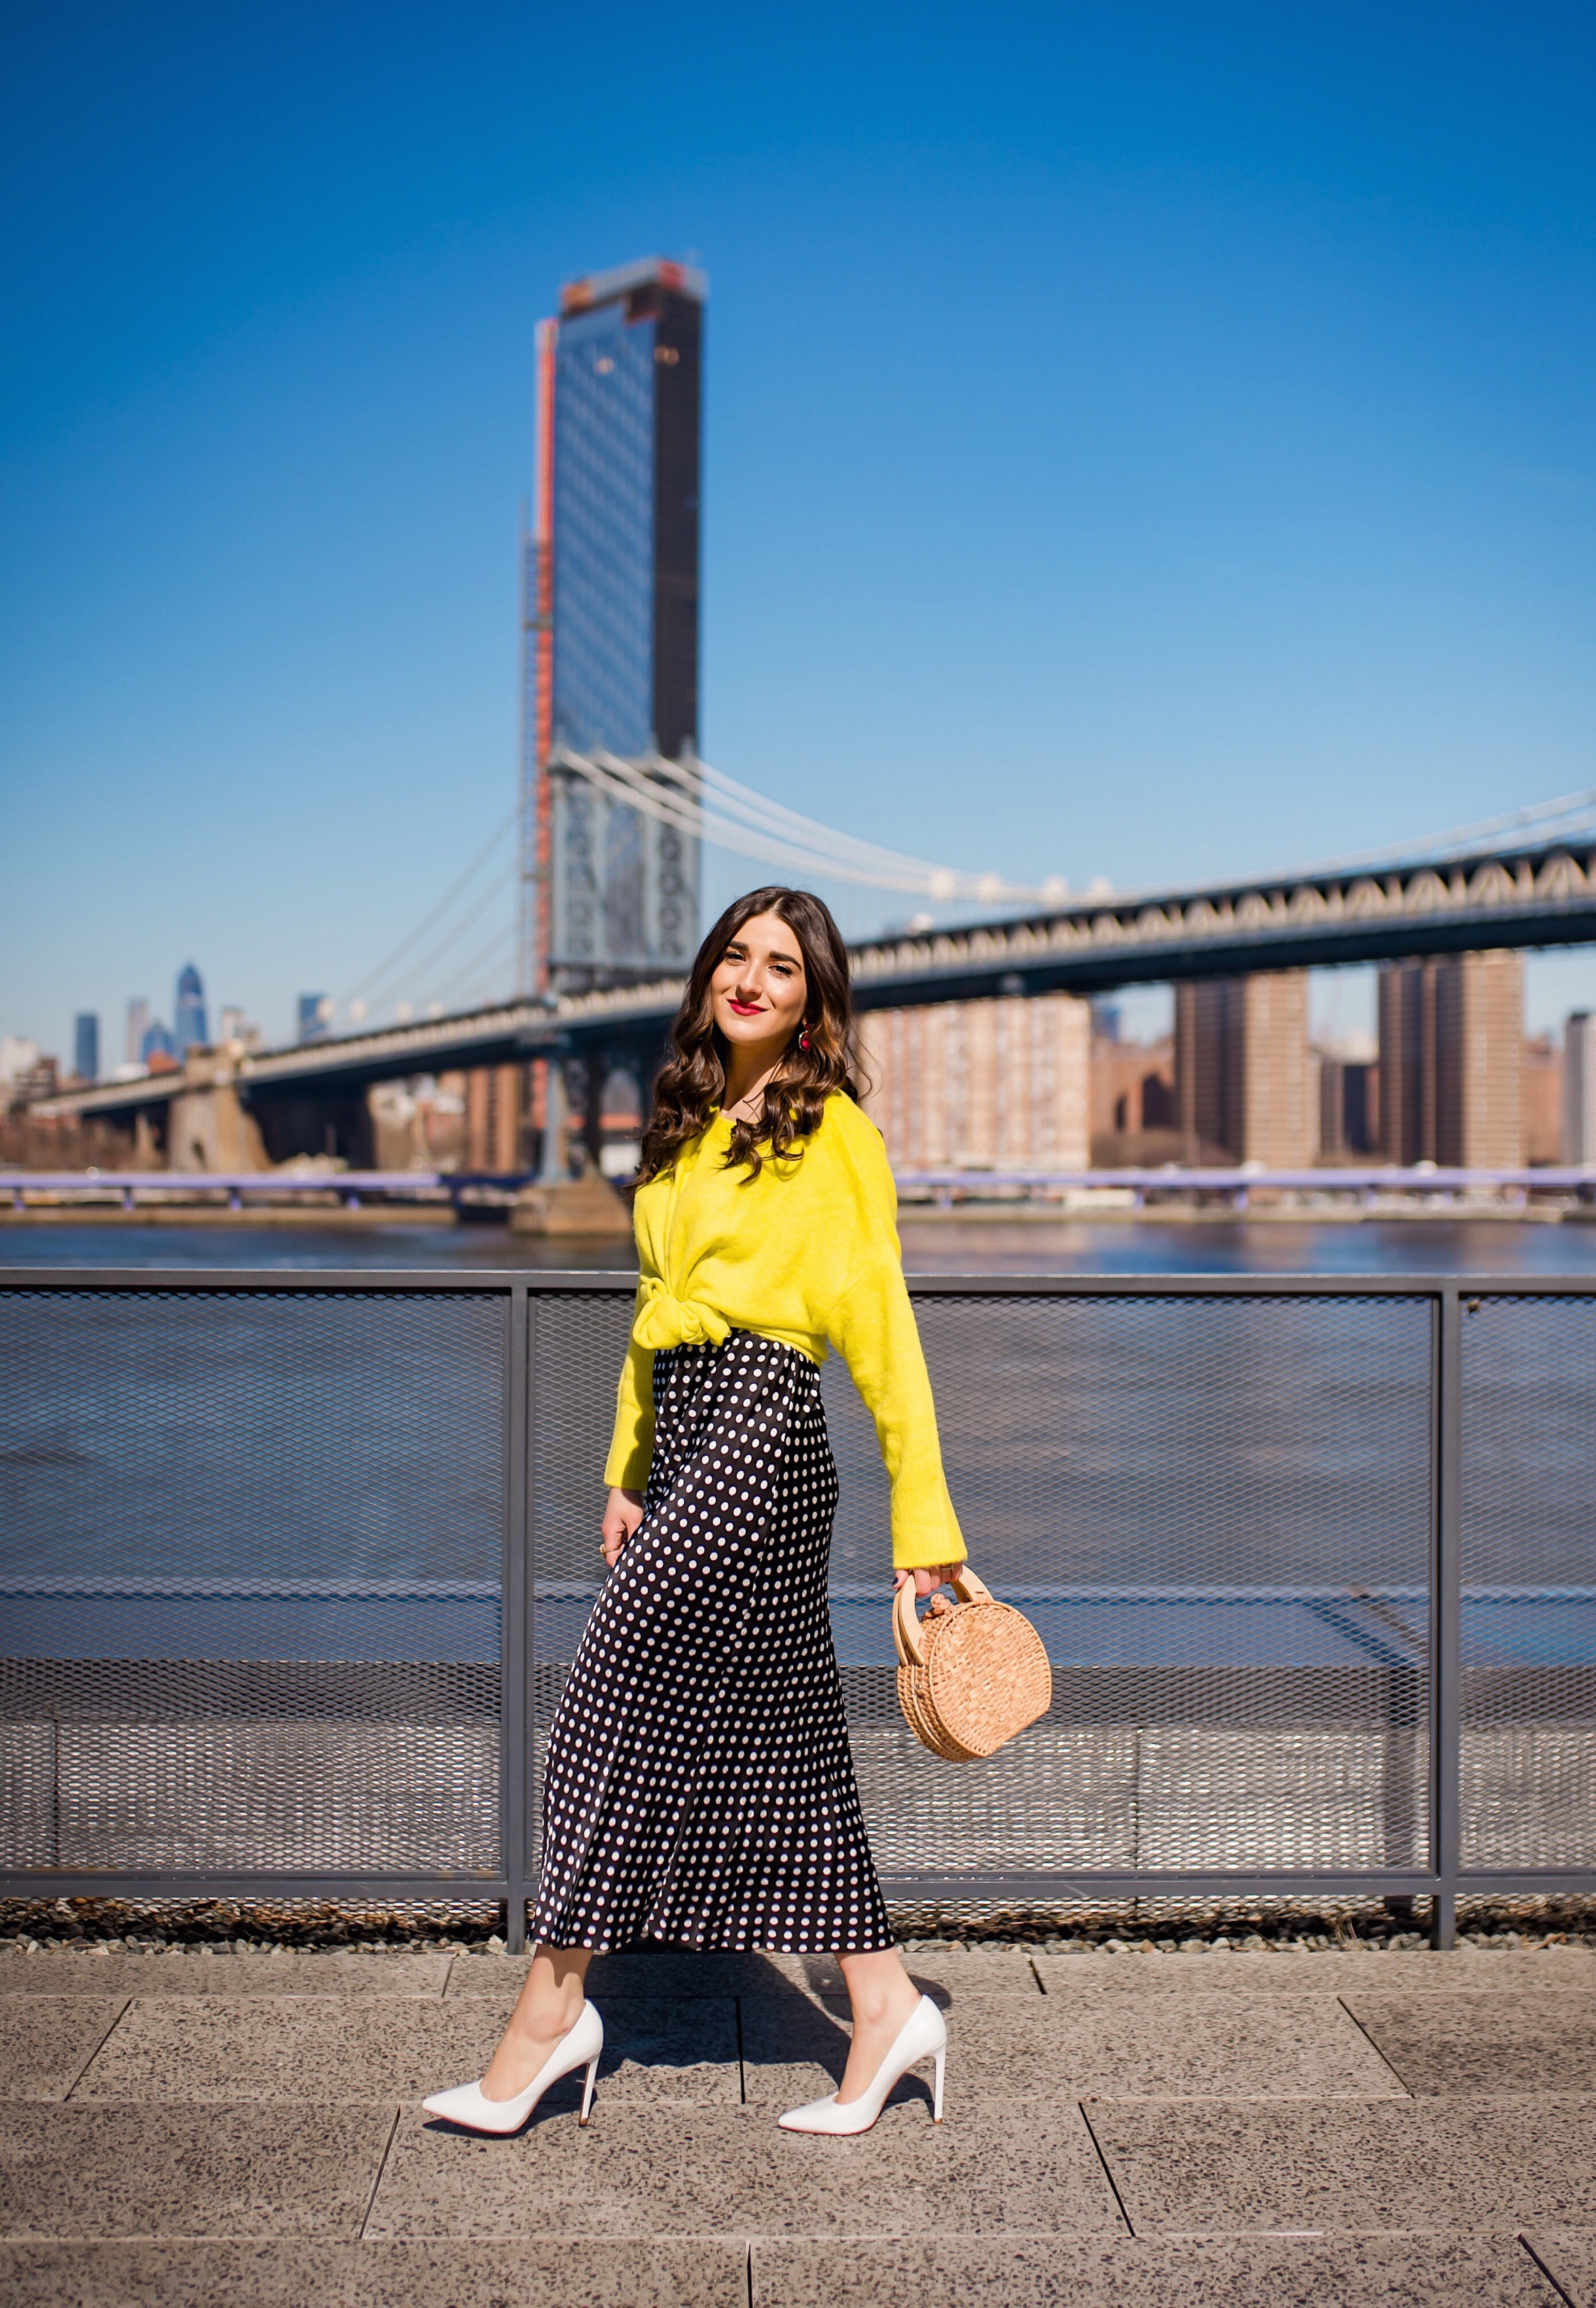 How I Wound Up With Boring White Dishes Navy Polka Dot Dress Neon Yellow Knotted Sweater Esther Santer Fashion Blog NYC Street Style Blogger Outfit OOTD Trendy Shopping Girl White Heels What How To Wear Photoshoot Dumbo Brooklyn Bridge Laurel Creative.JPG